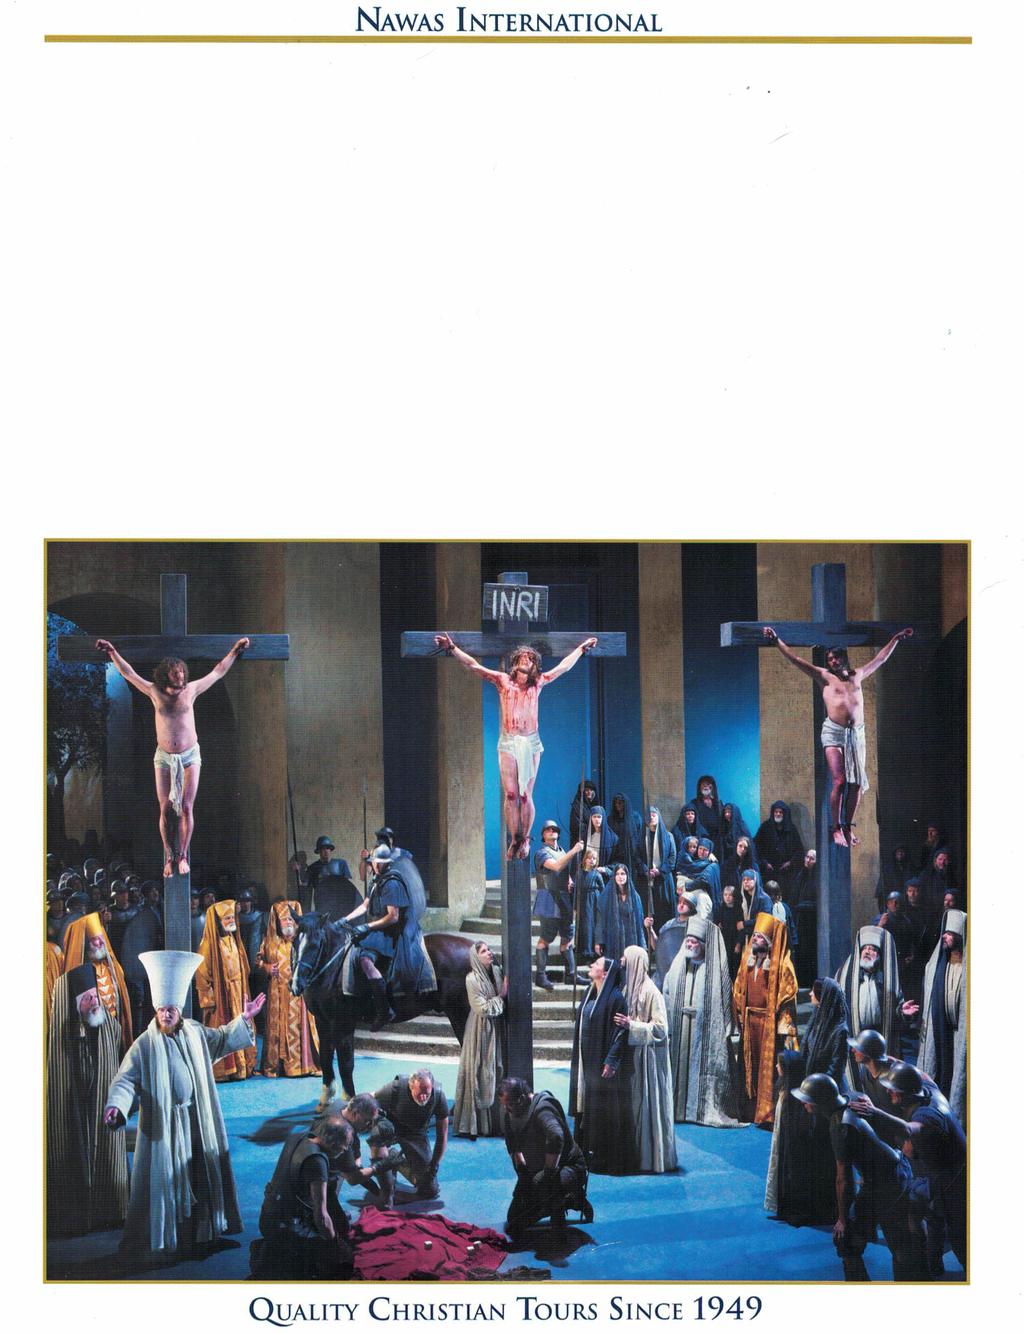 SPLENDORS OF EASTERN EUROPE Including The Passion Play Of Oberammergau 11 Days: August 3-13, 2020 Visiting Prague Budapest Vienna Munich